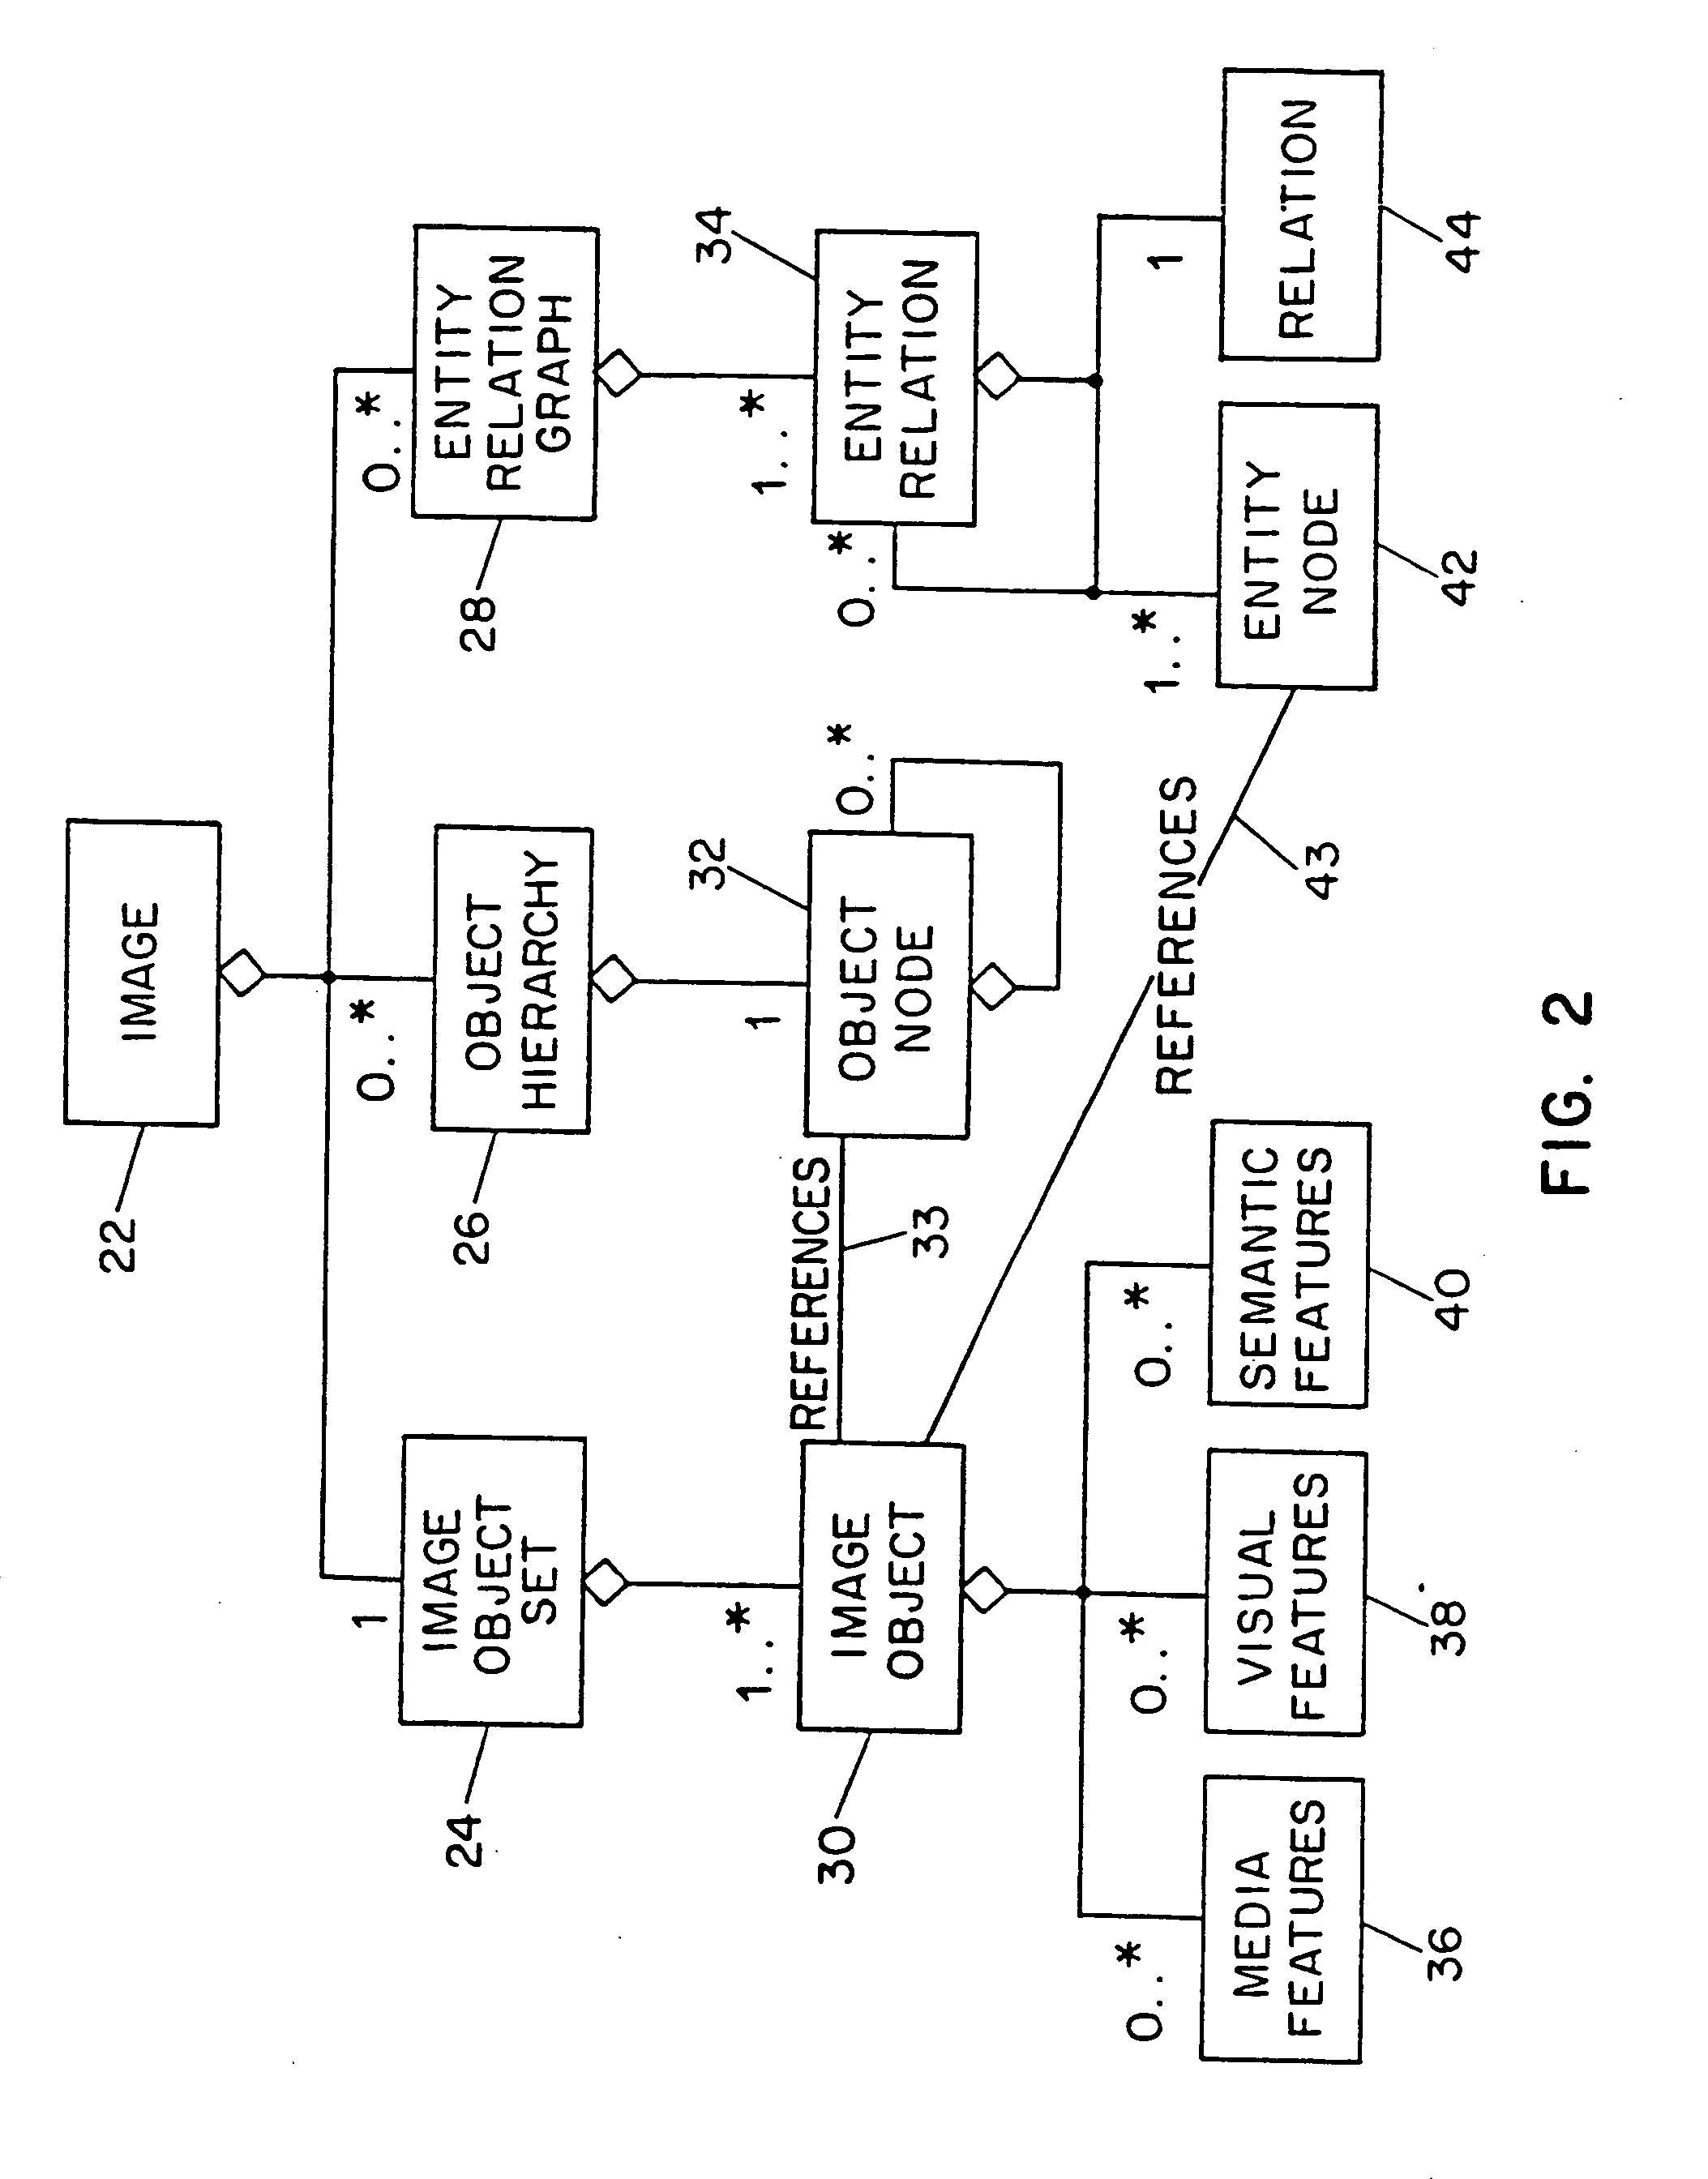 Video description system and method